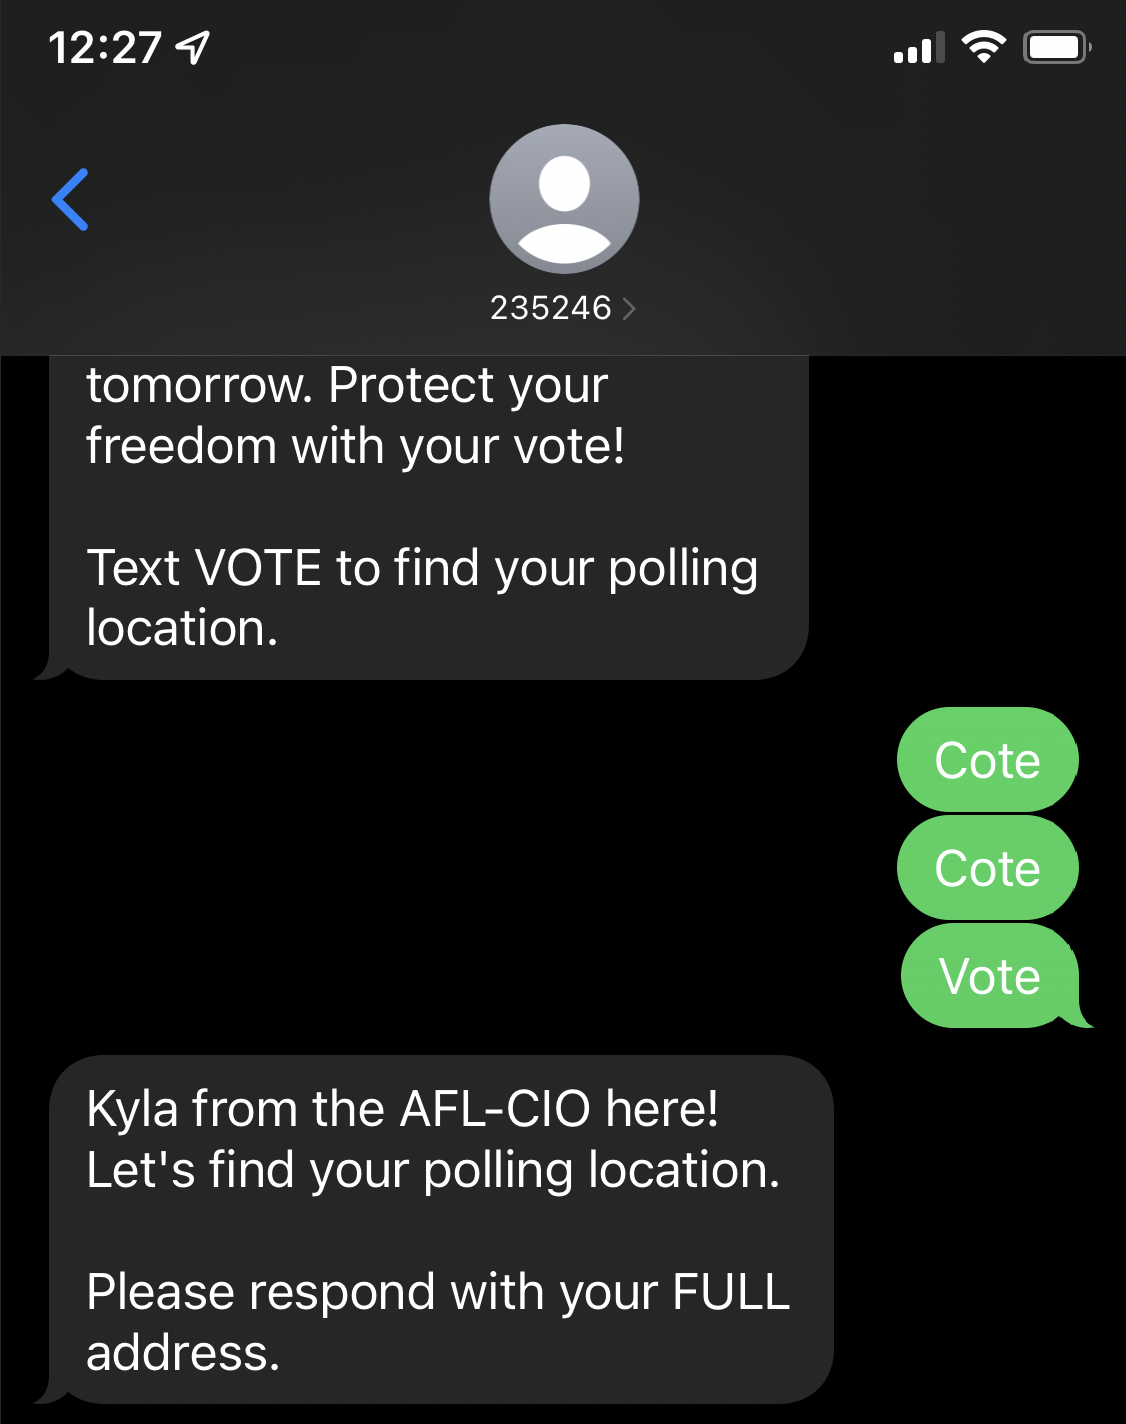 A screenshot of a texting conversation with AFL-CIO mobile messaging program. It reads:

AFL-CIO: Text VOTE to find your polling location.

Me: Cote. Cote. Vote.

AFL-CIO: Kyla from AFL-CIO here! Let's find your polling location. Please respond with your FULL address.